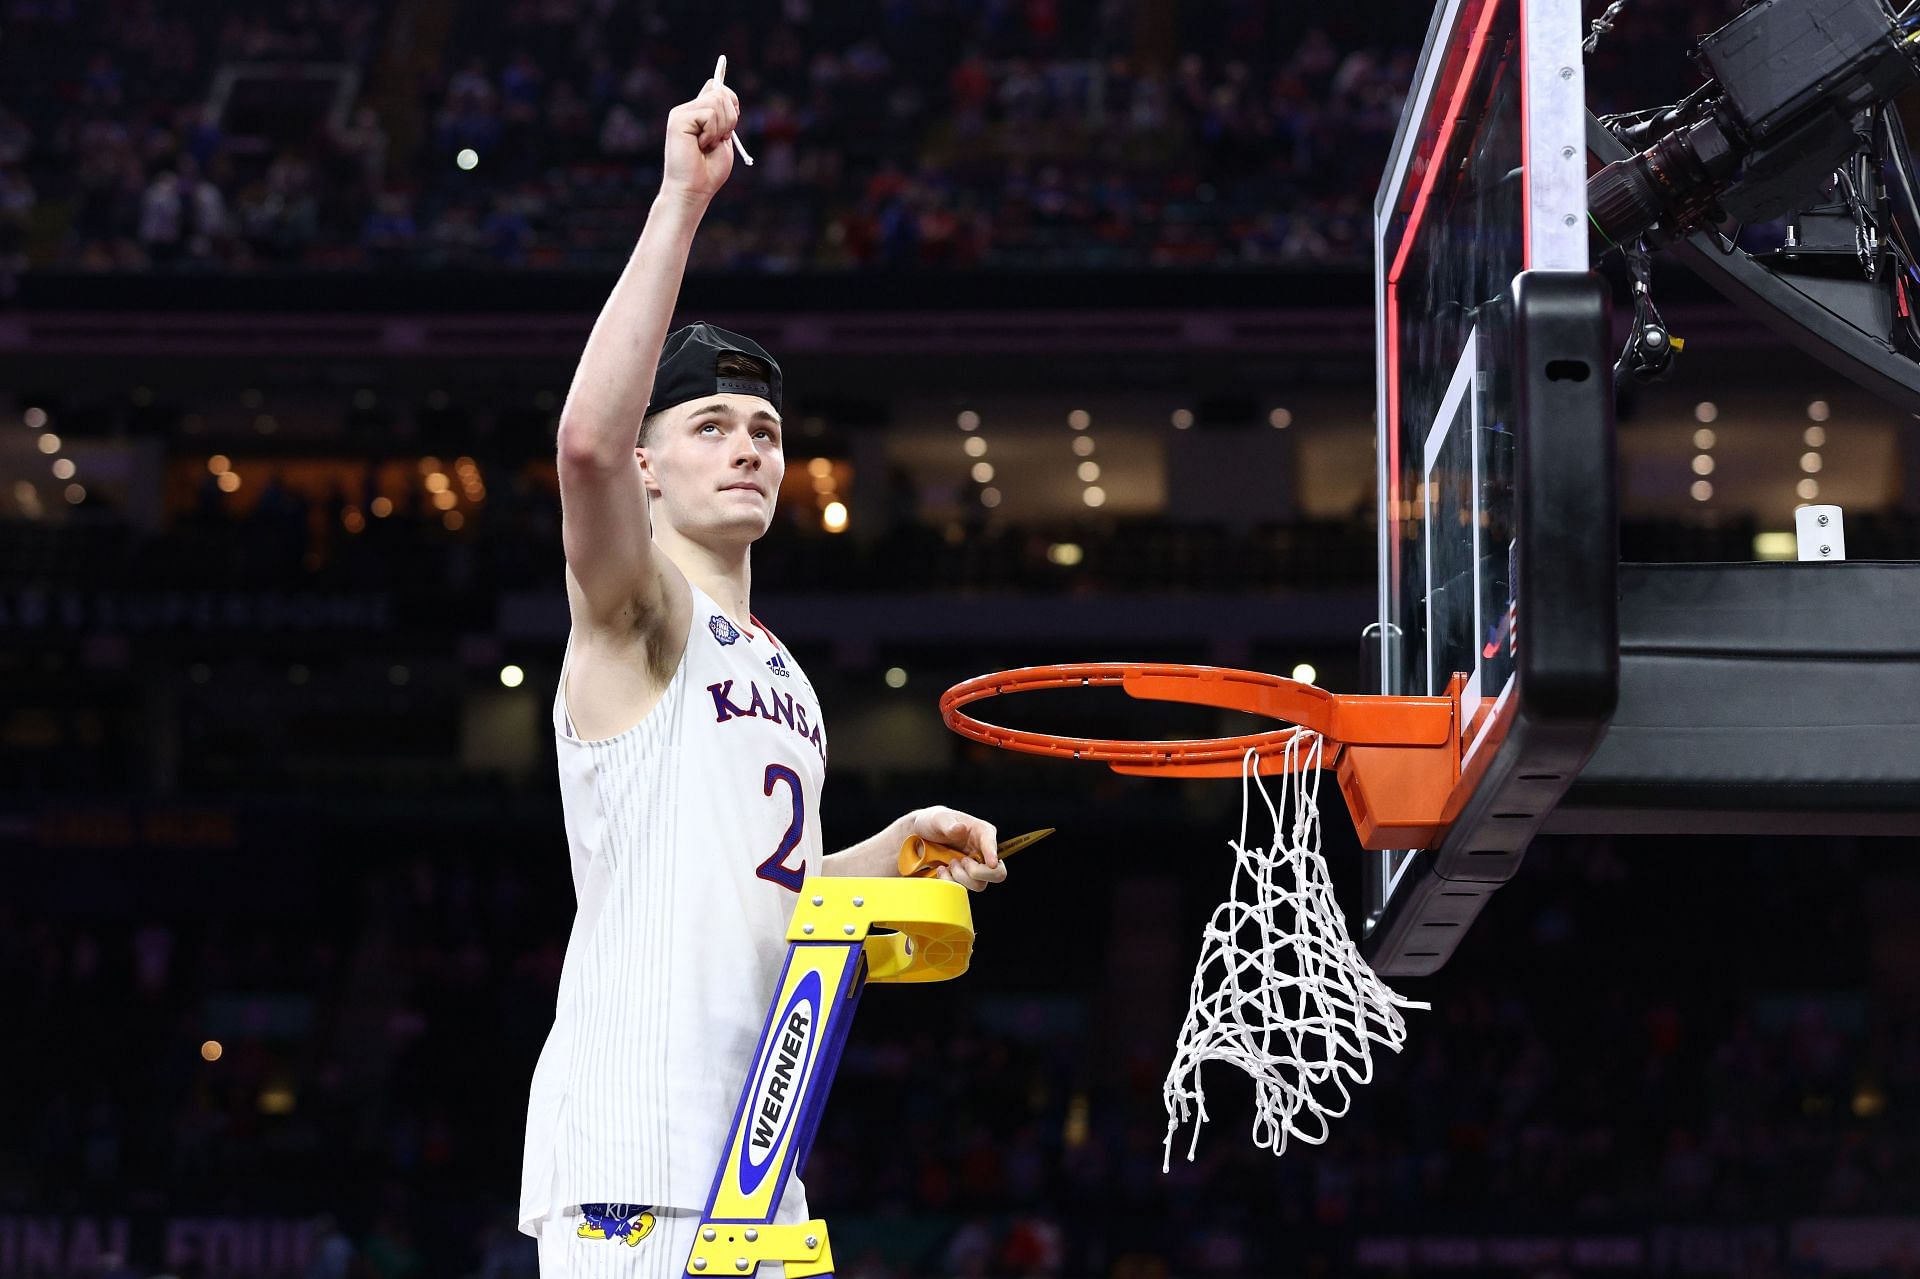 After winning a national championship, Christian Braun has his eyes set on the NBA.